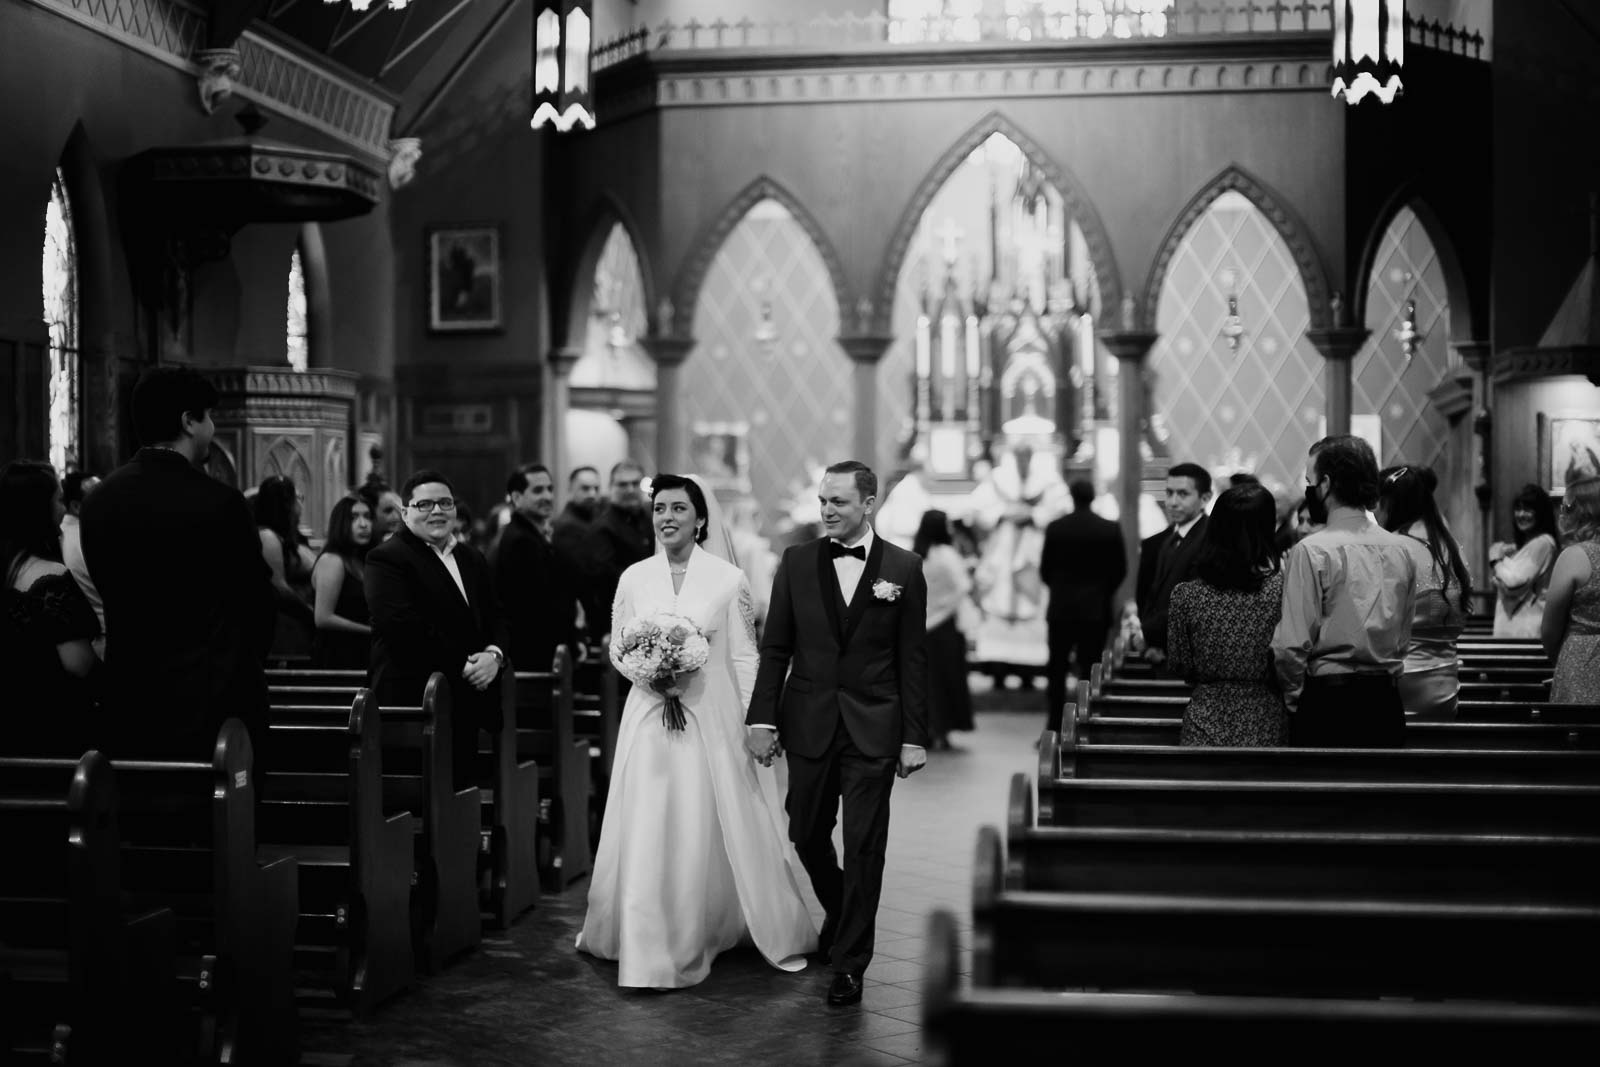 026 Our Lady of the Atonement Leica wedding photographer Philip Thomas Photography